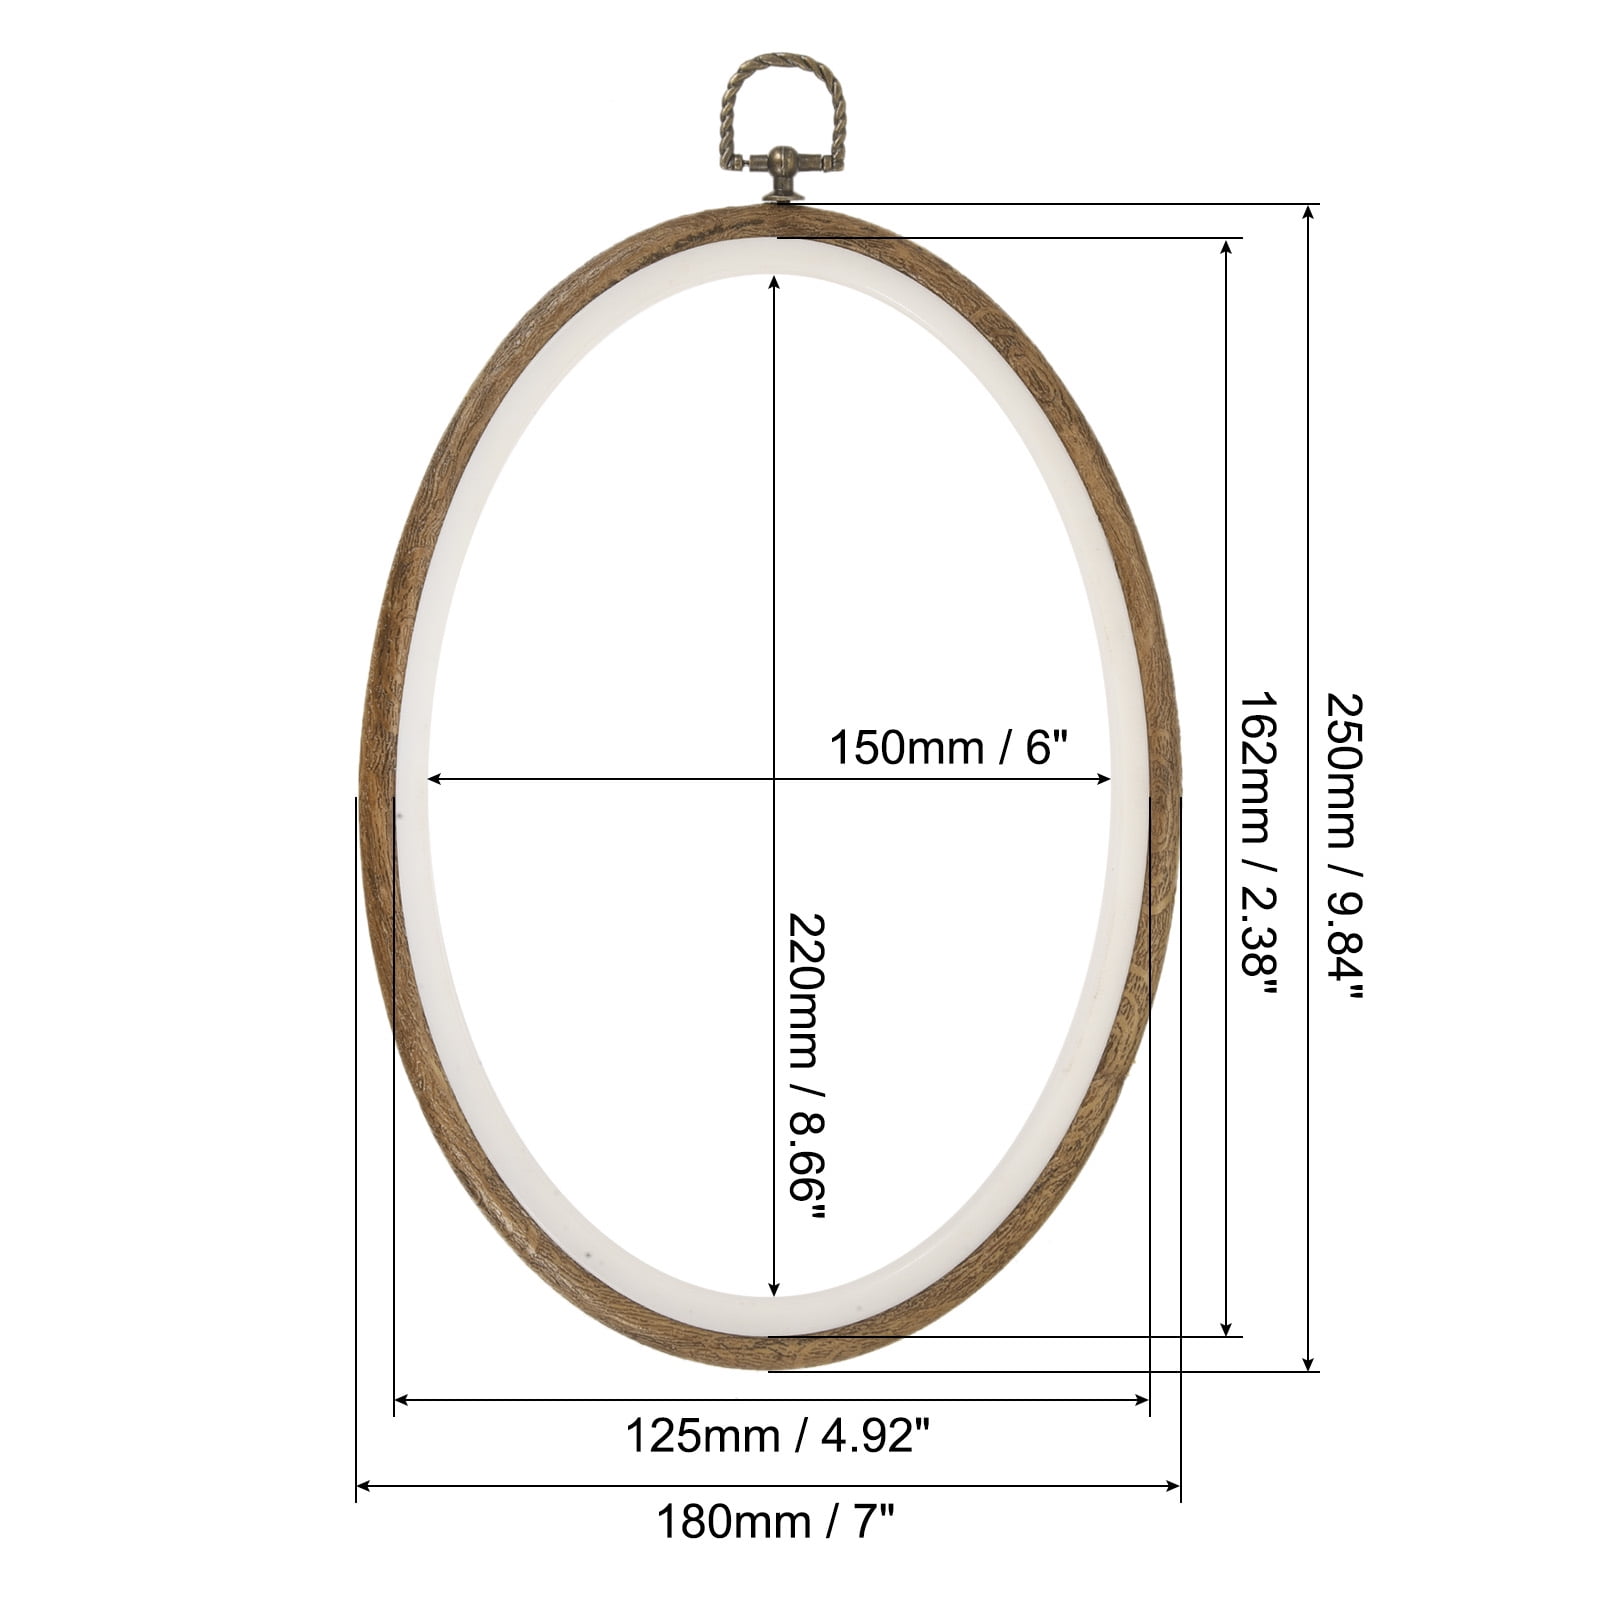 Wheaton 27 By 16 Inch Wooden Oval Embroidery Hoop with Stand